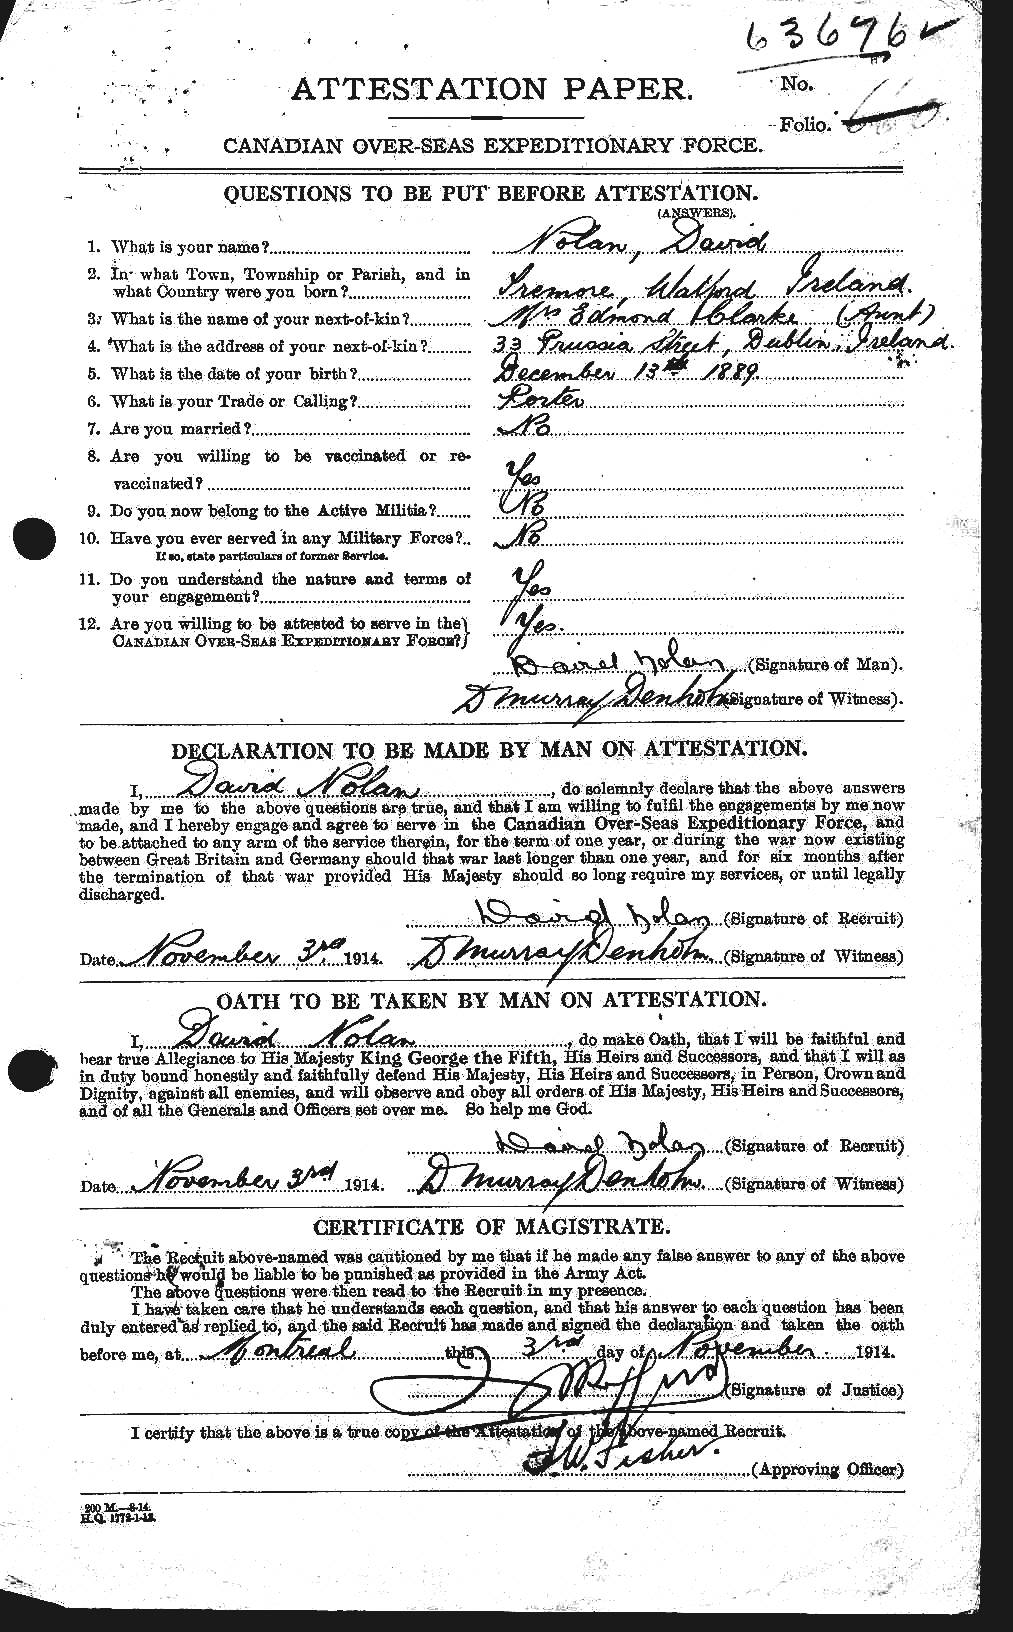 Personnel Records of the First World War - CEF 548545a